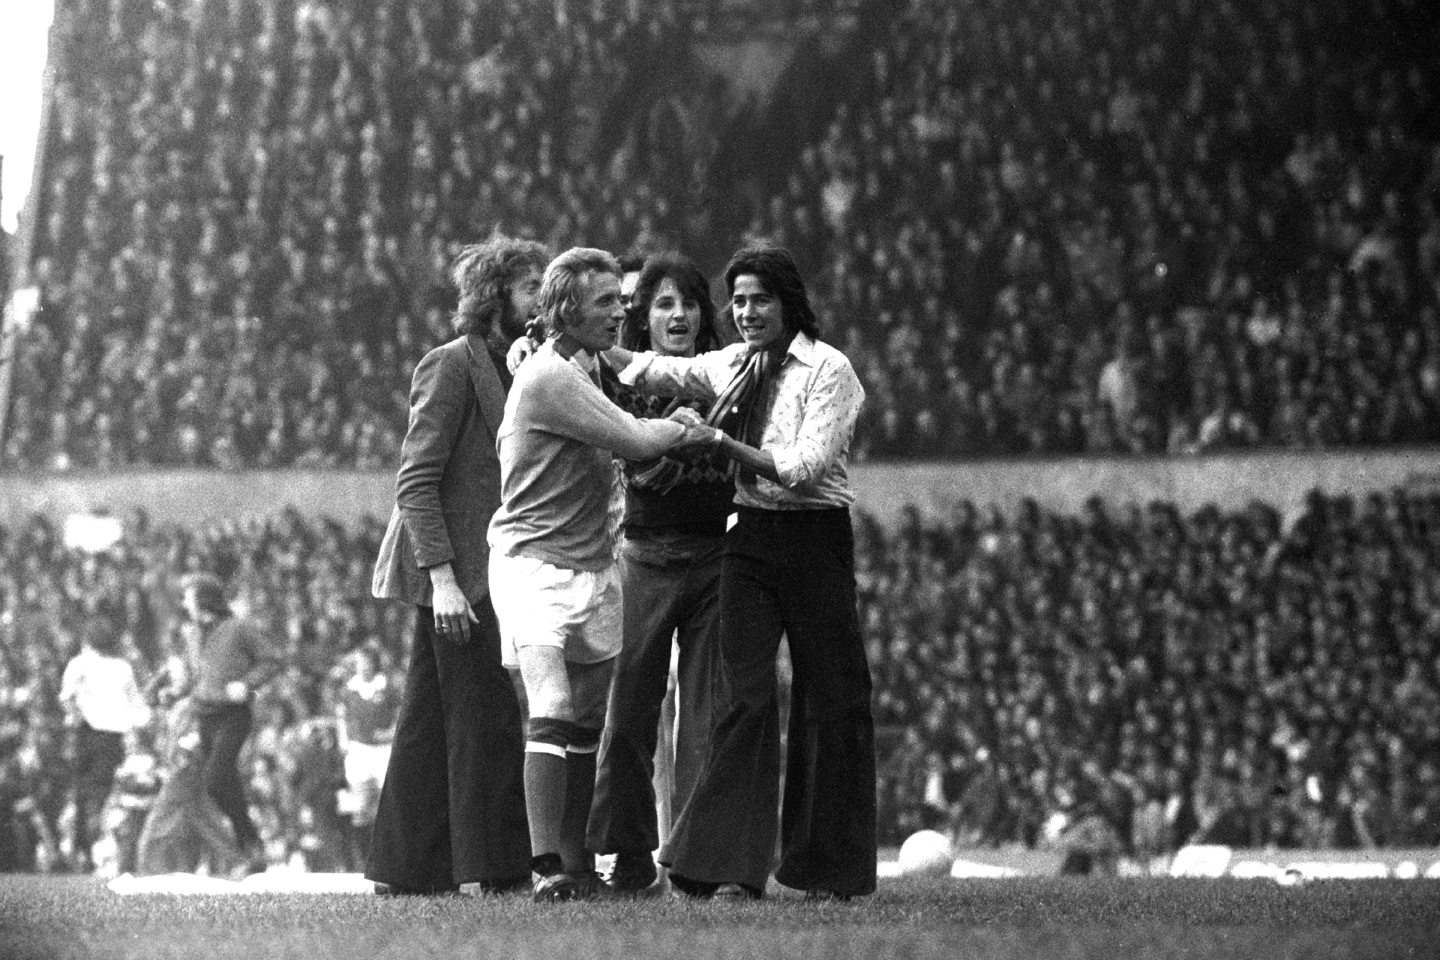 Manchester United fans wrap United scarves around the neck of Manchester City's Denis Law, who had just scored the winning goal with a cheeky backheel to condemn United, his former club, to relegation in 1974.